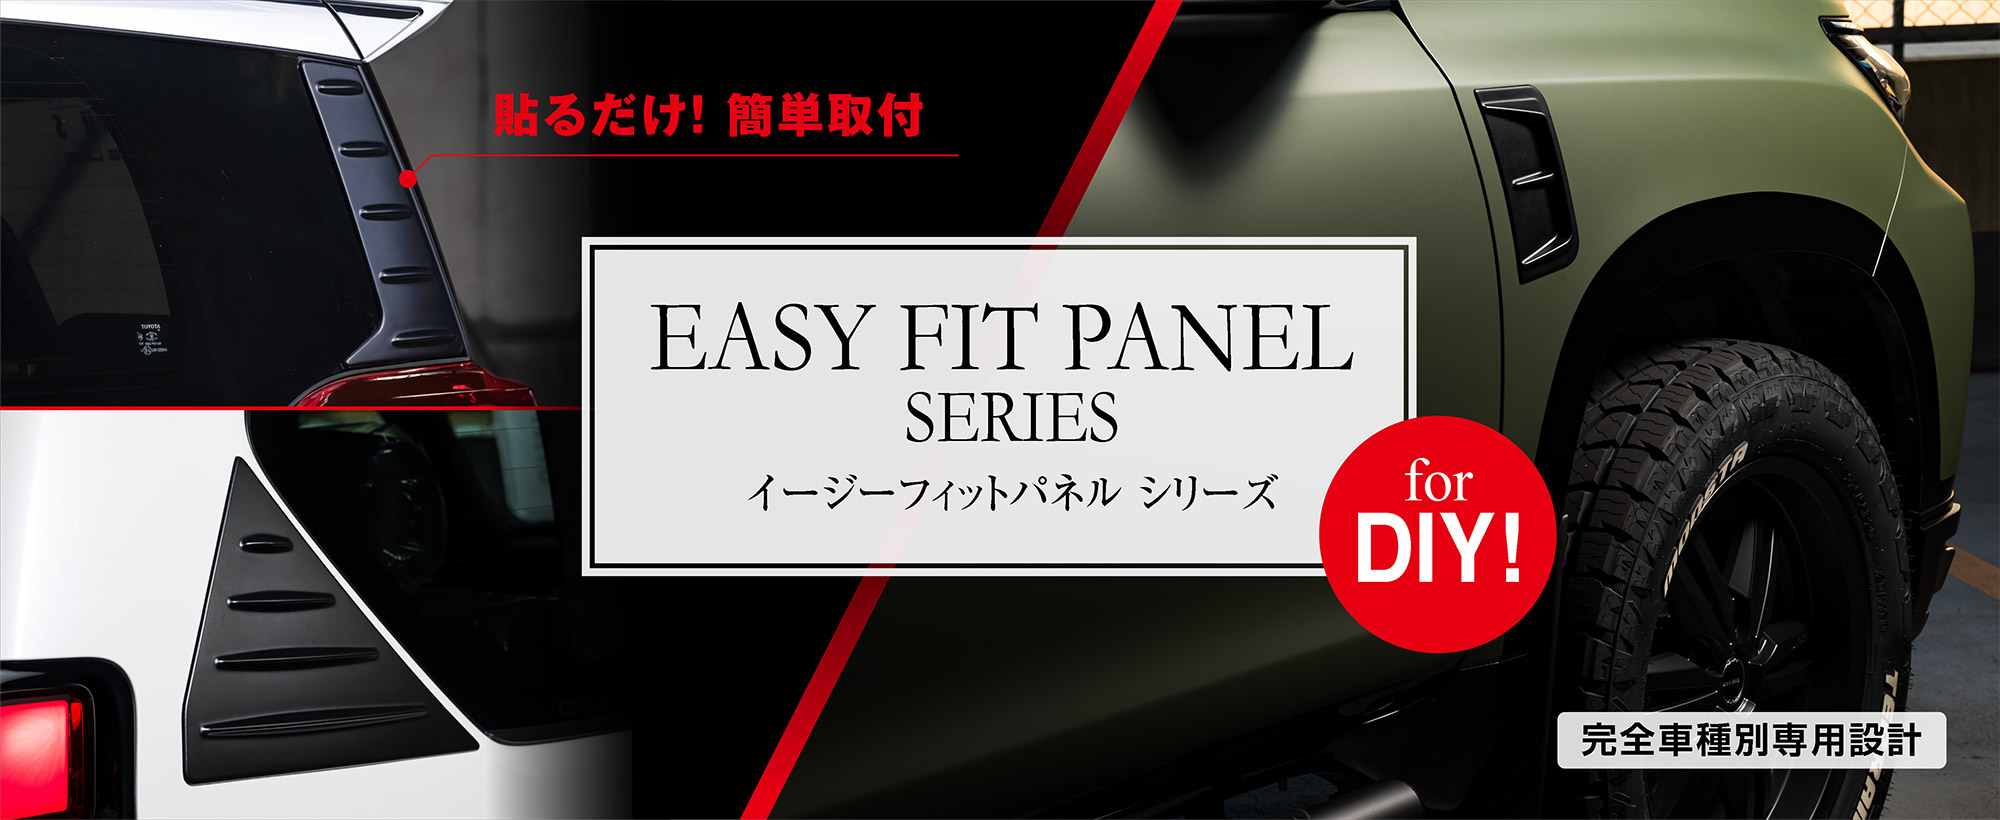 Easy Fit Panel Series